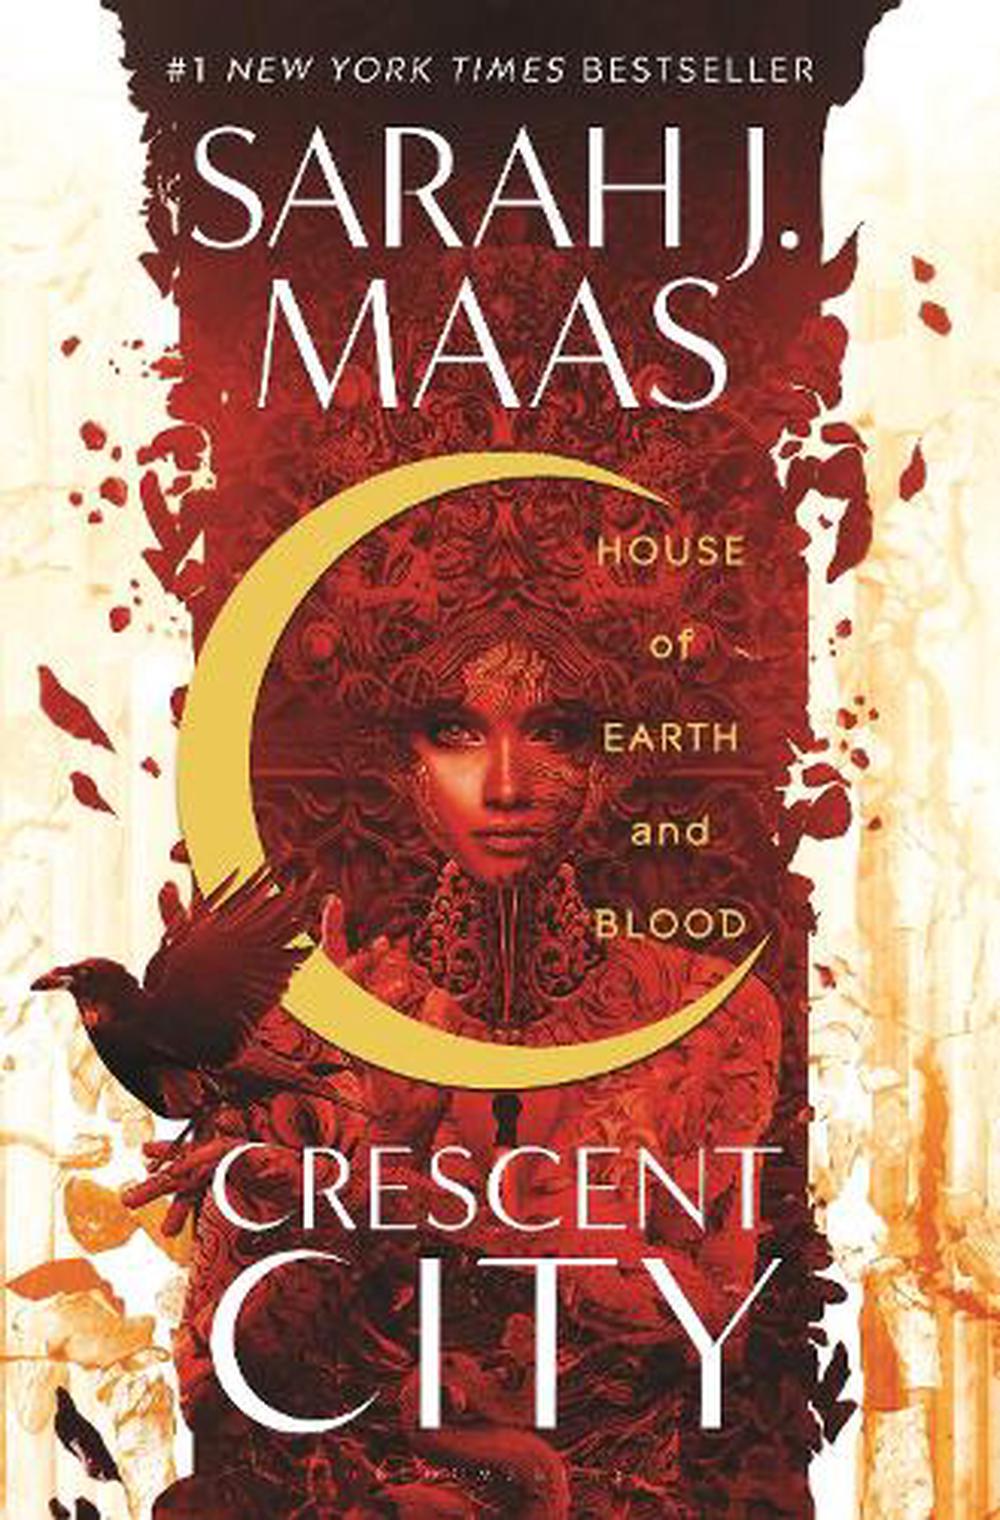 house of earth and blood series